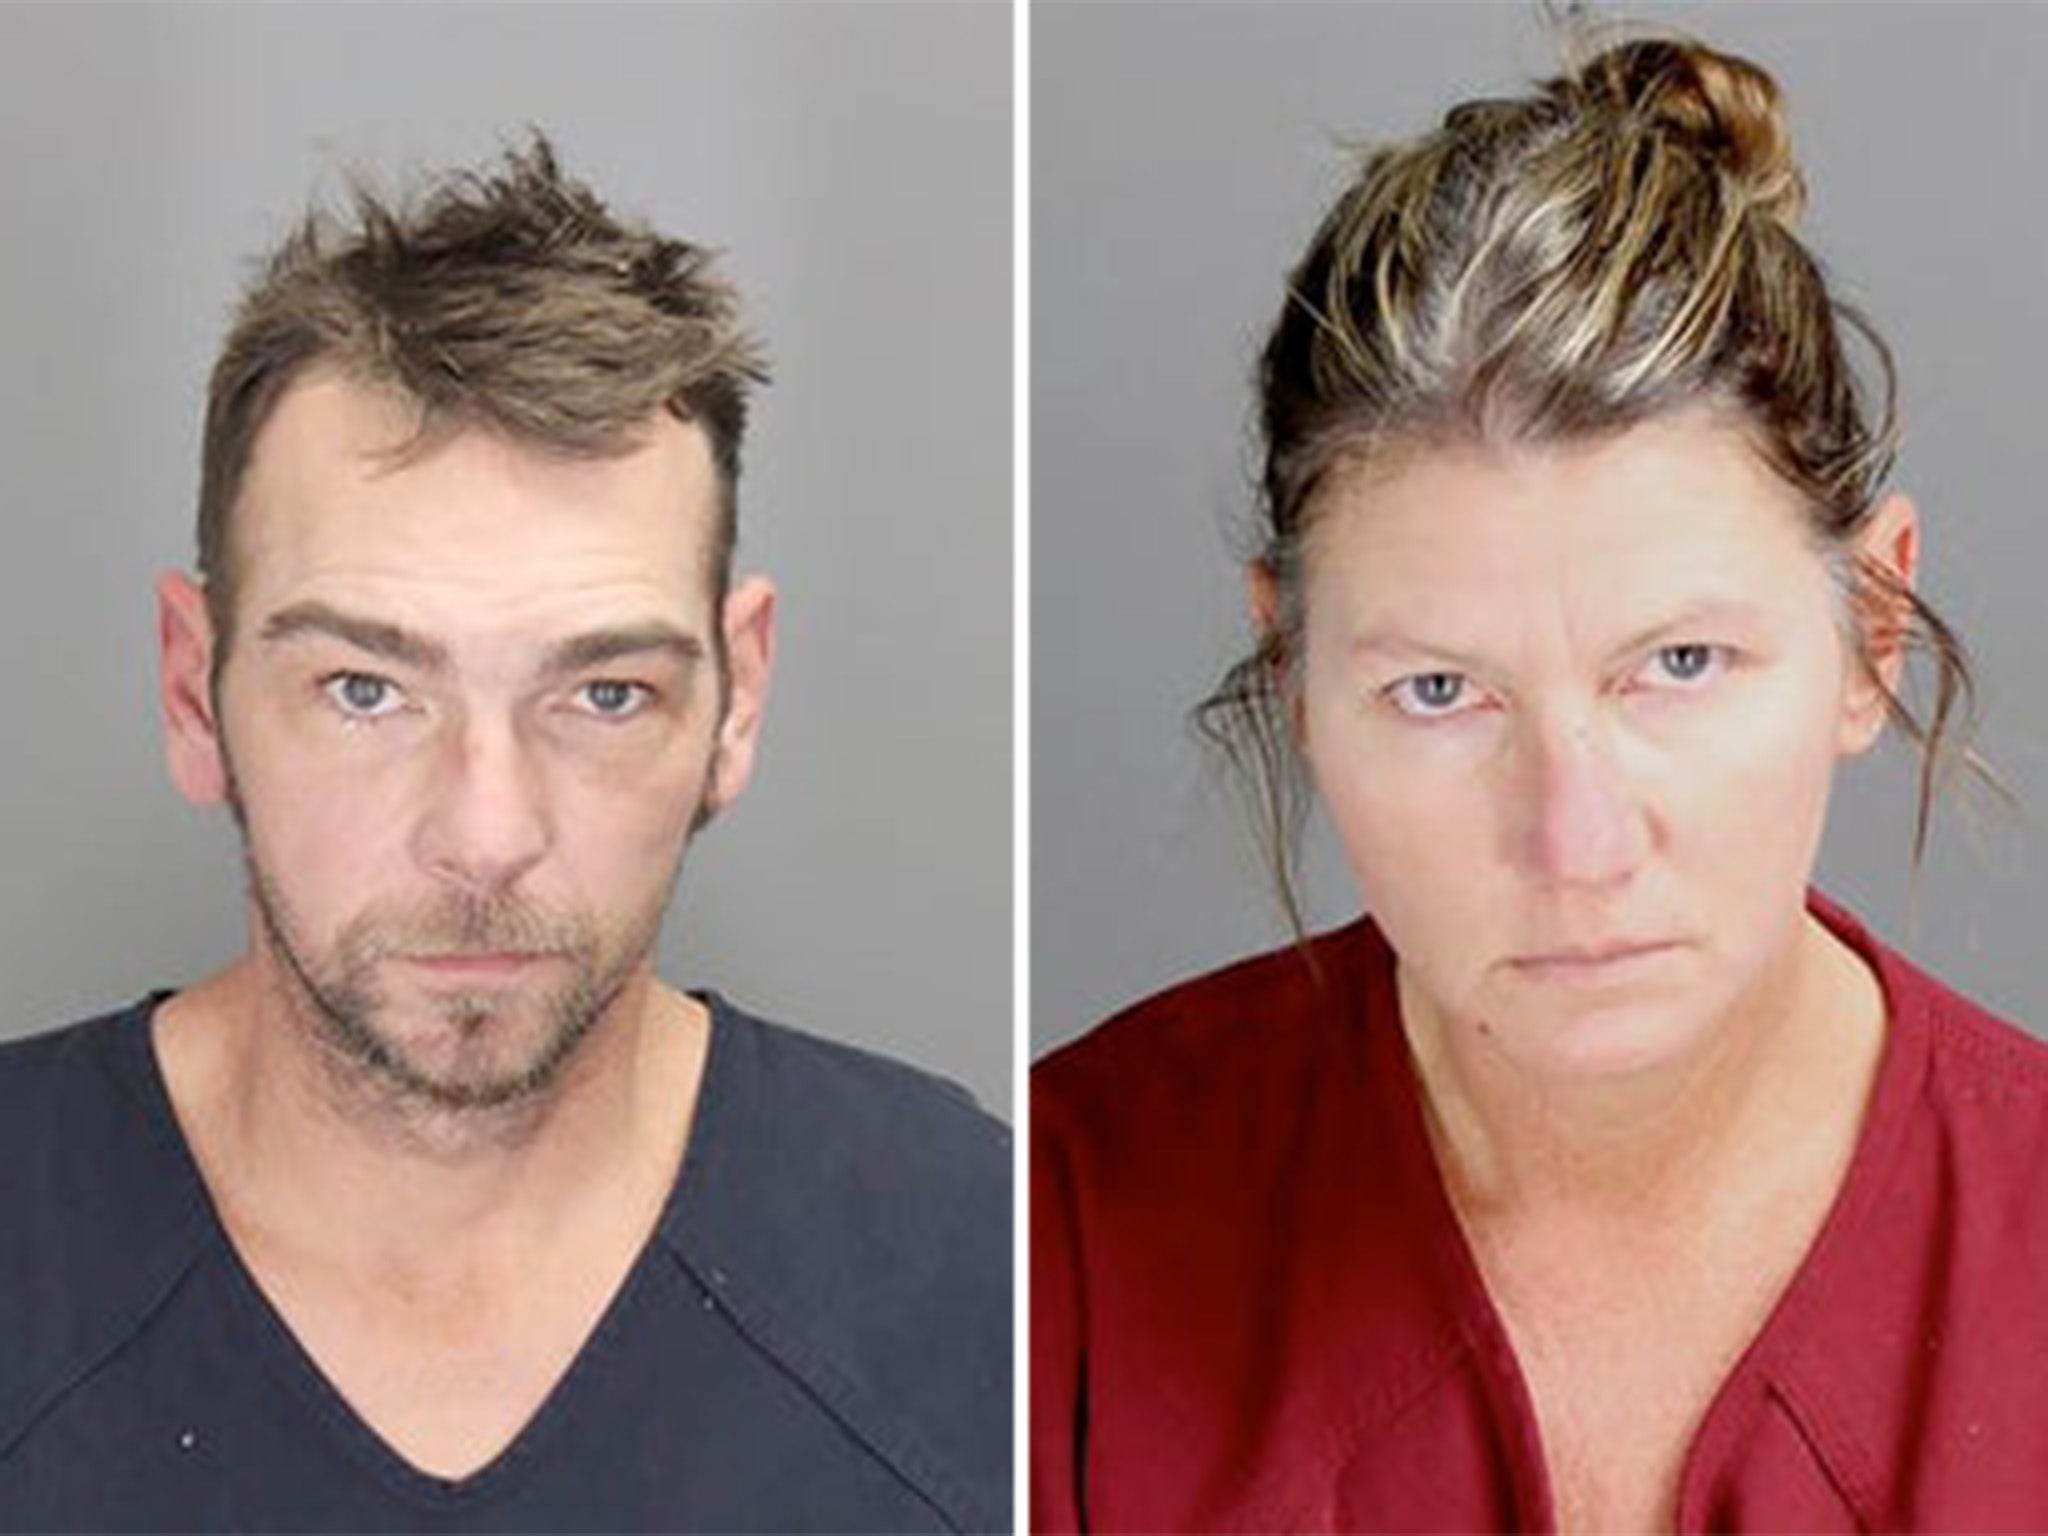 Jennifer and James Crumbley pictured in their mugshots after their arrest